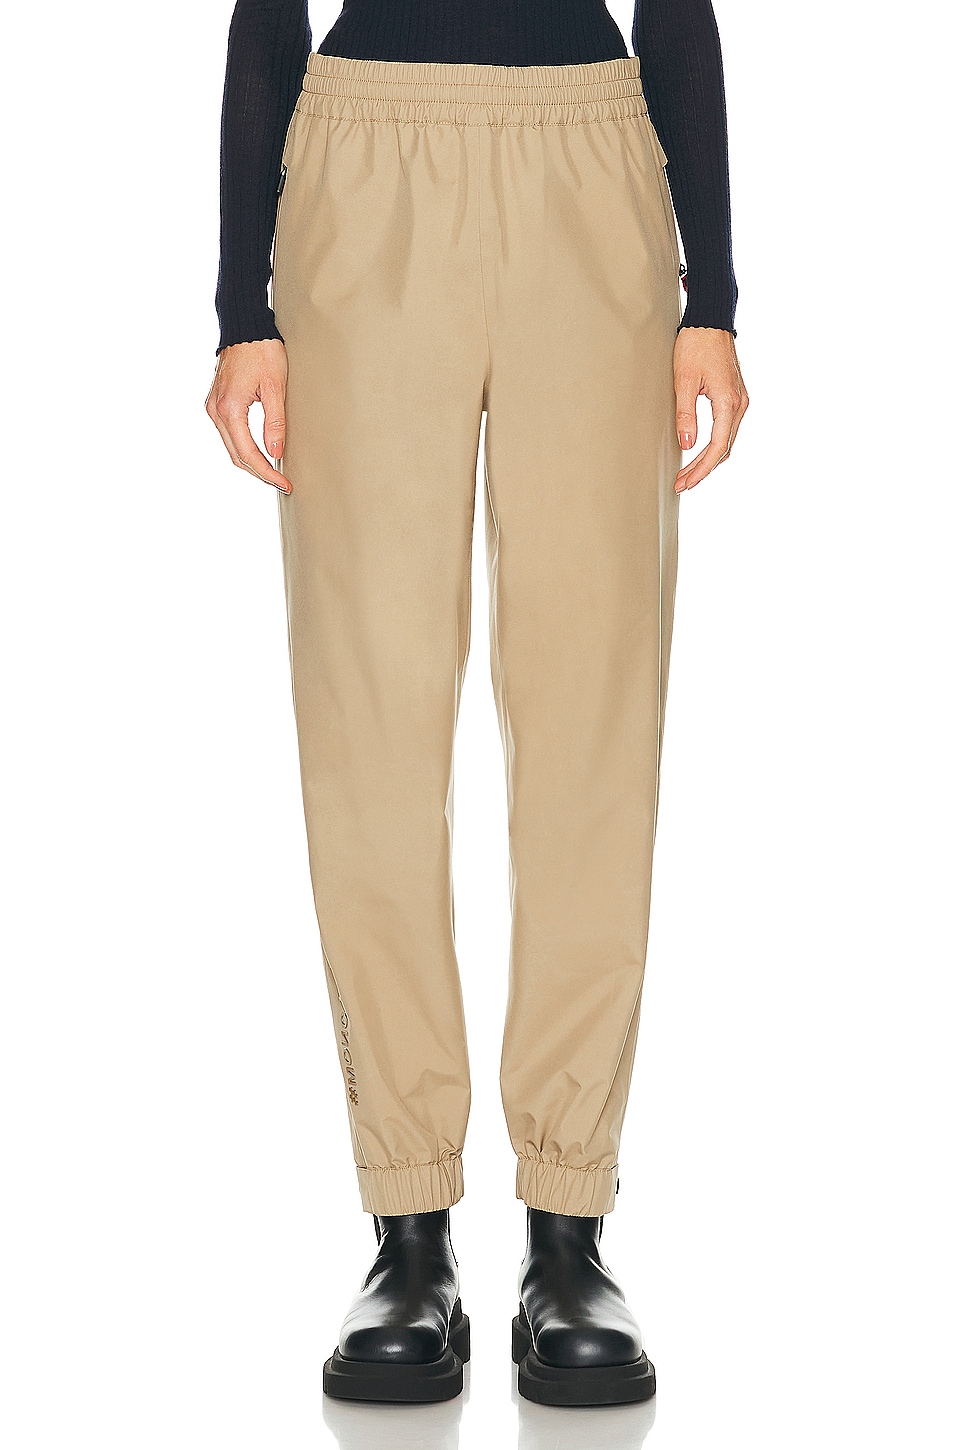 Image 1 of Moncler Grenoble Trousers in Tan